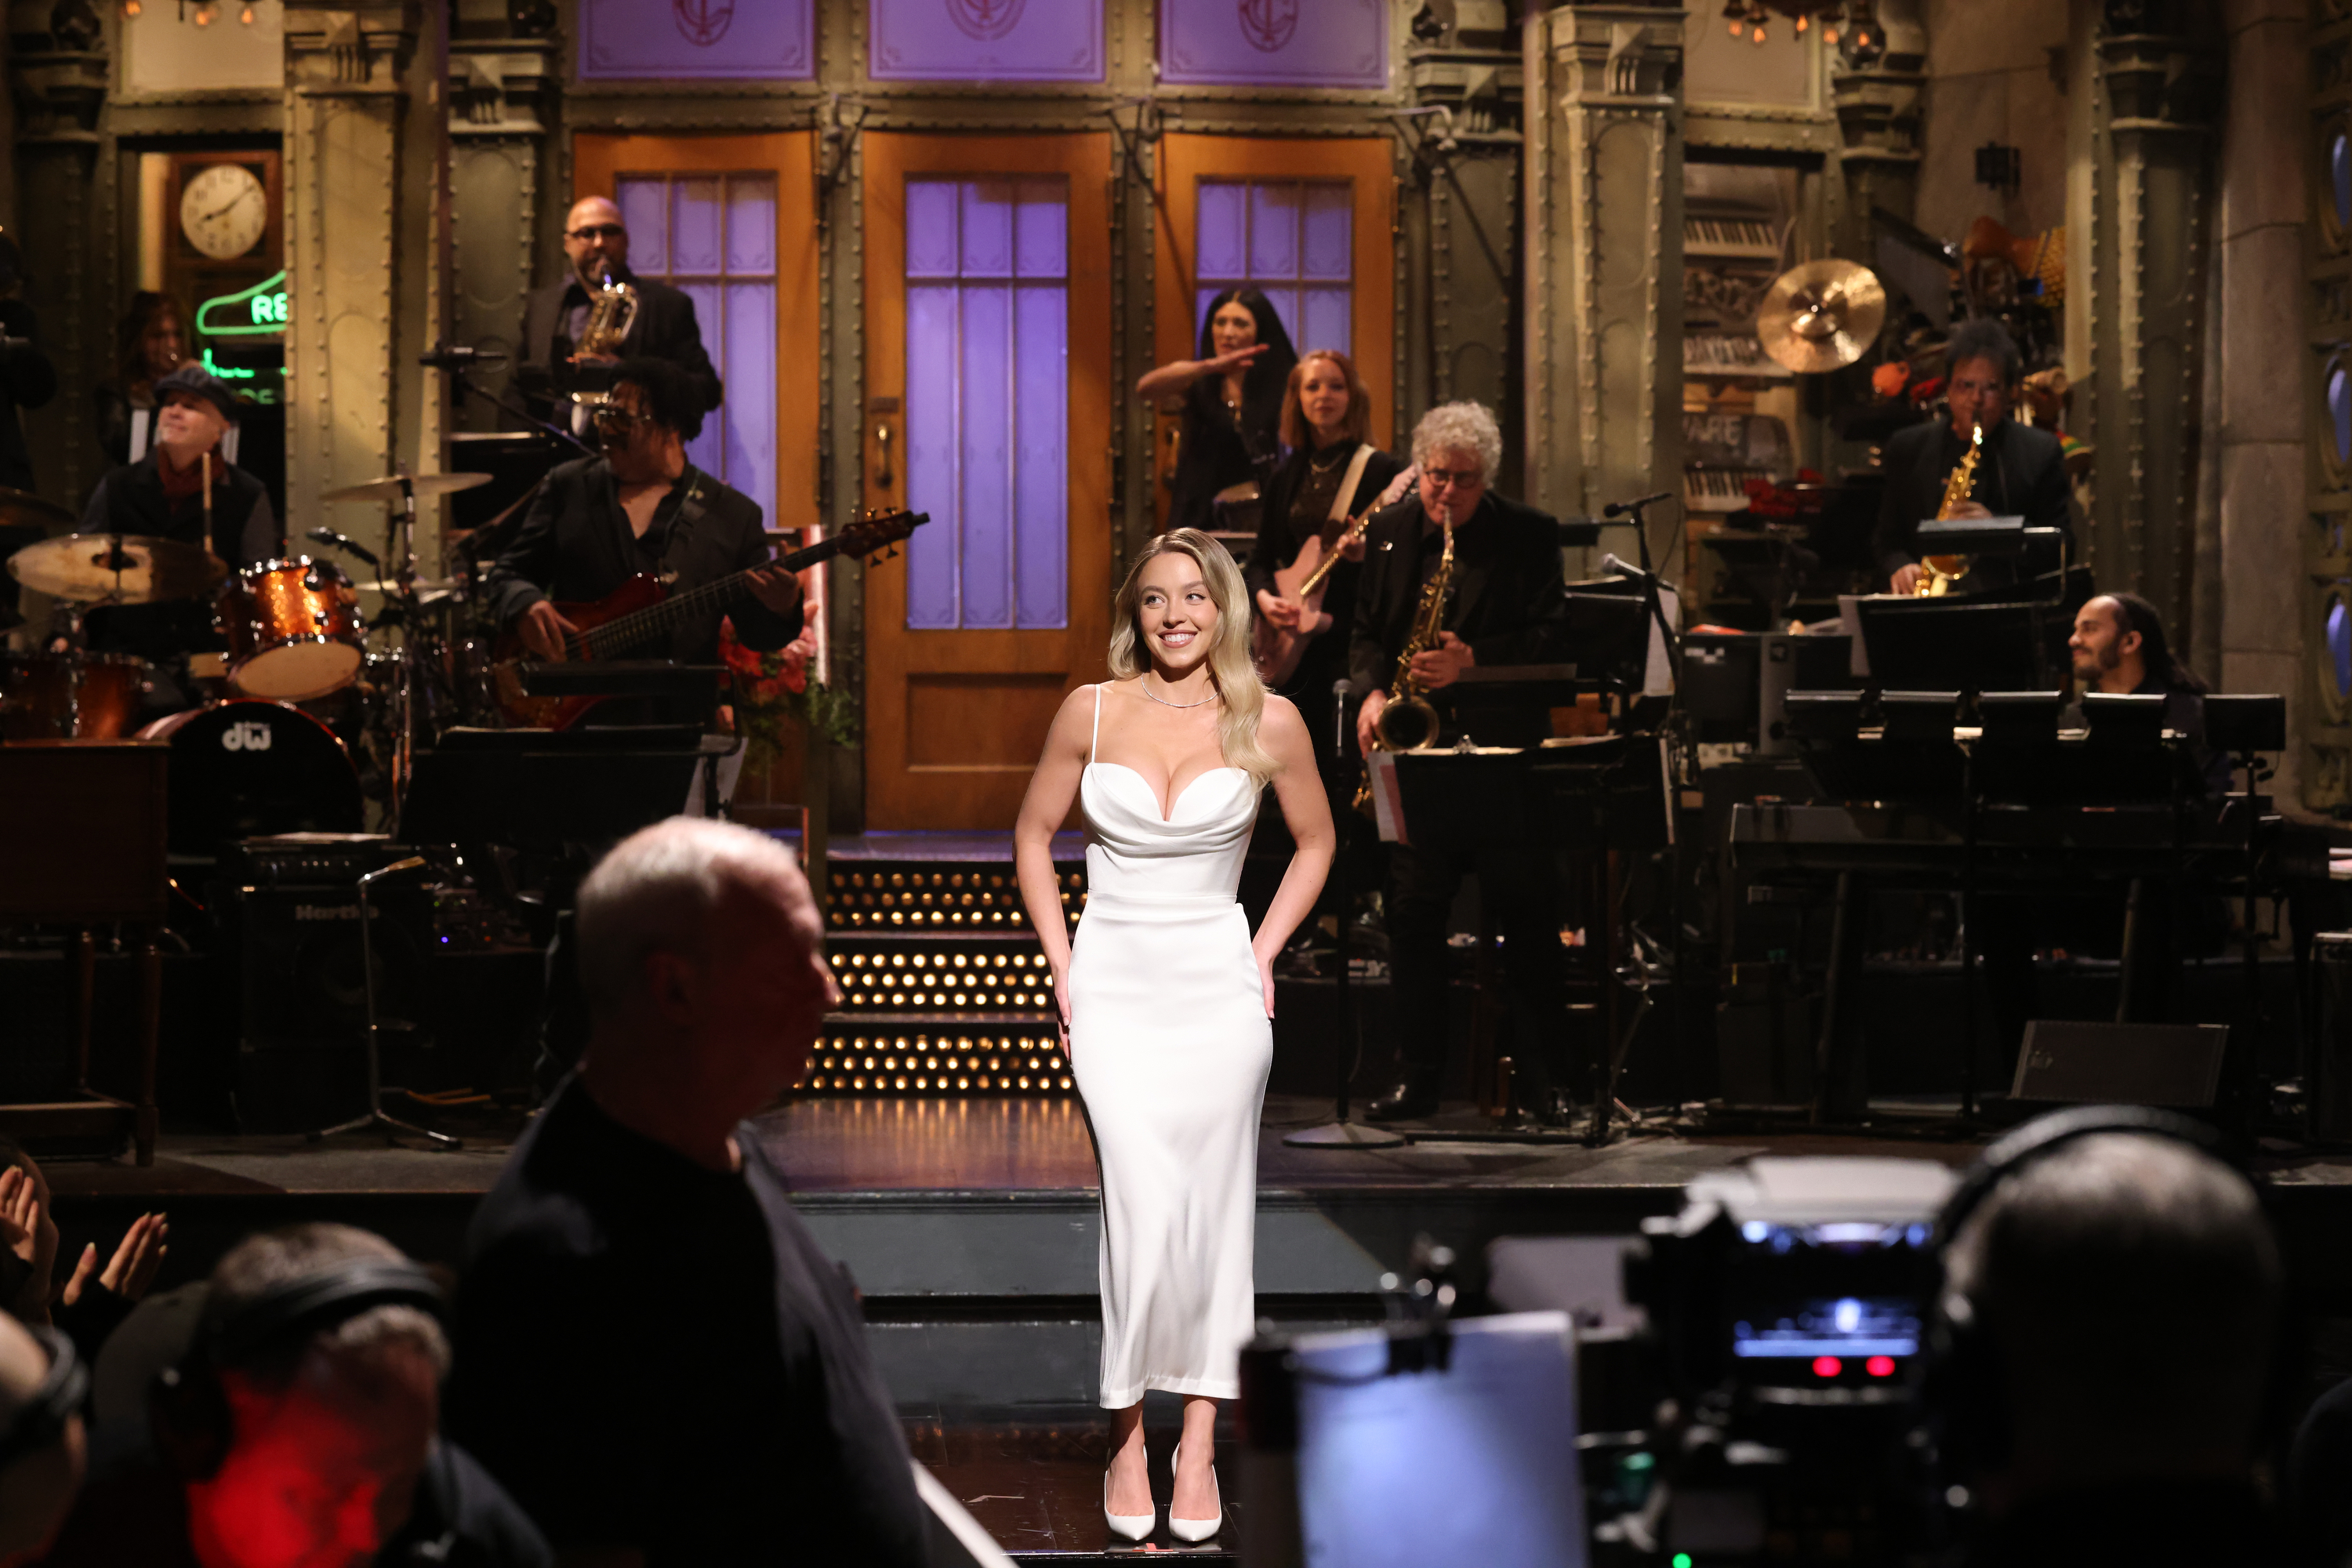 Sydney in a spaghetti-strap dress on the SNL stage with band in background